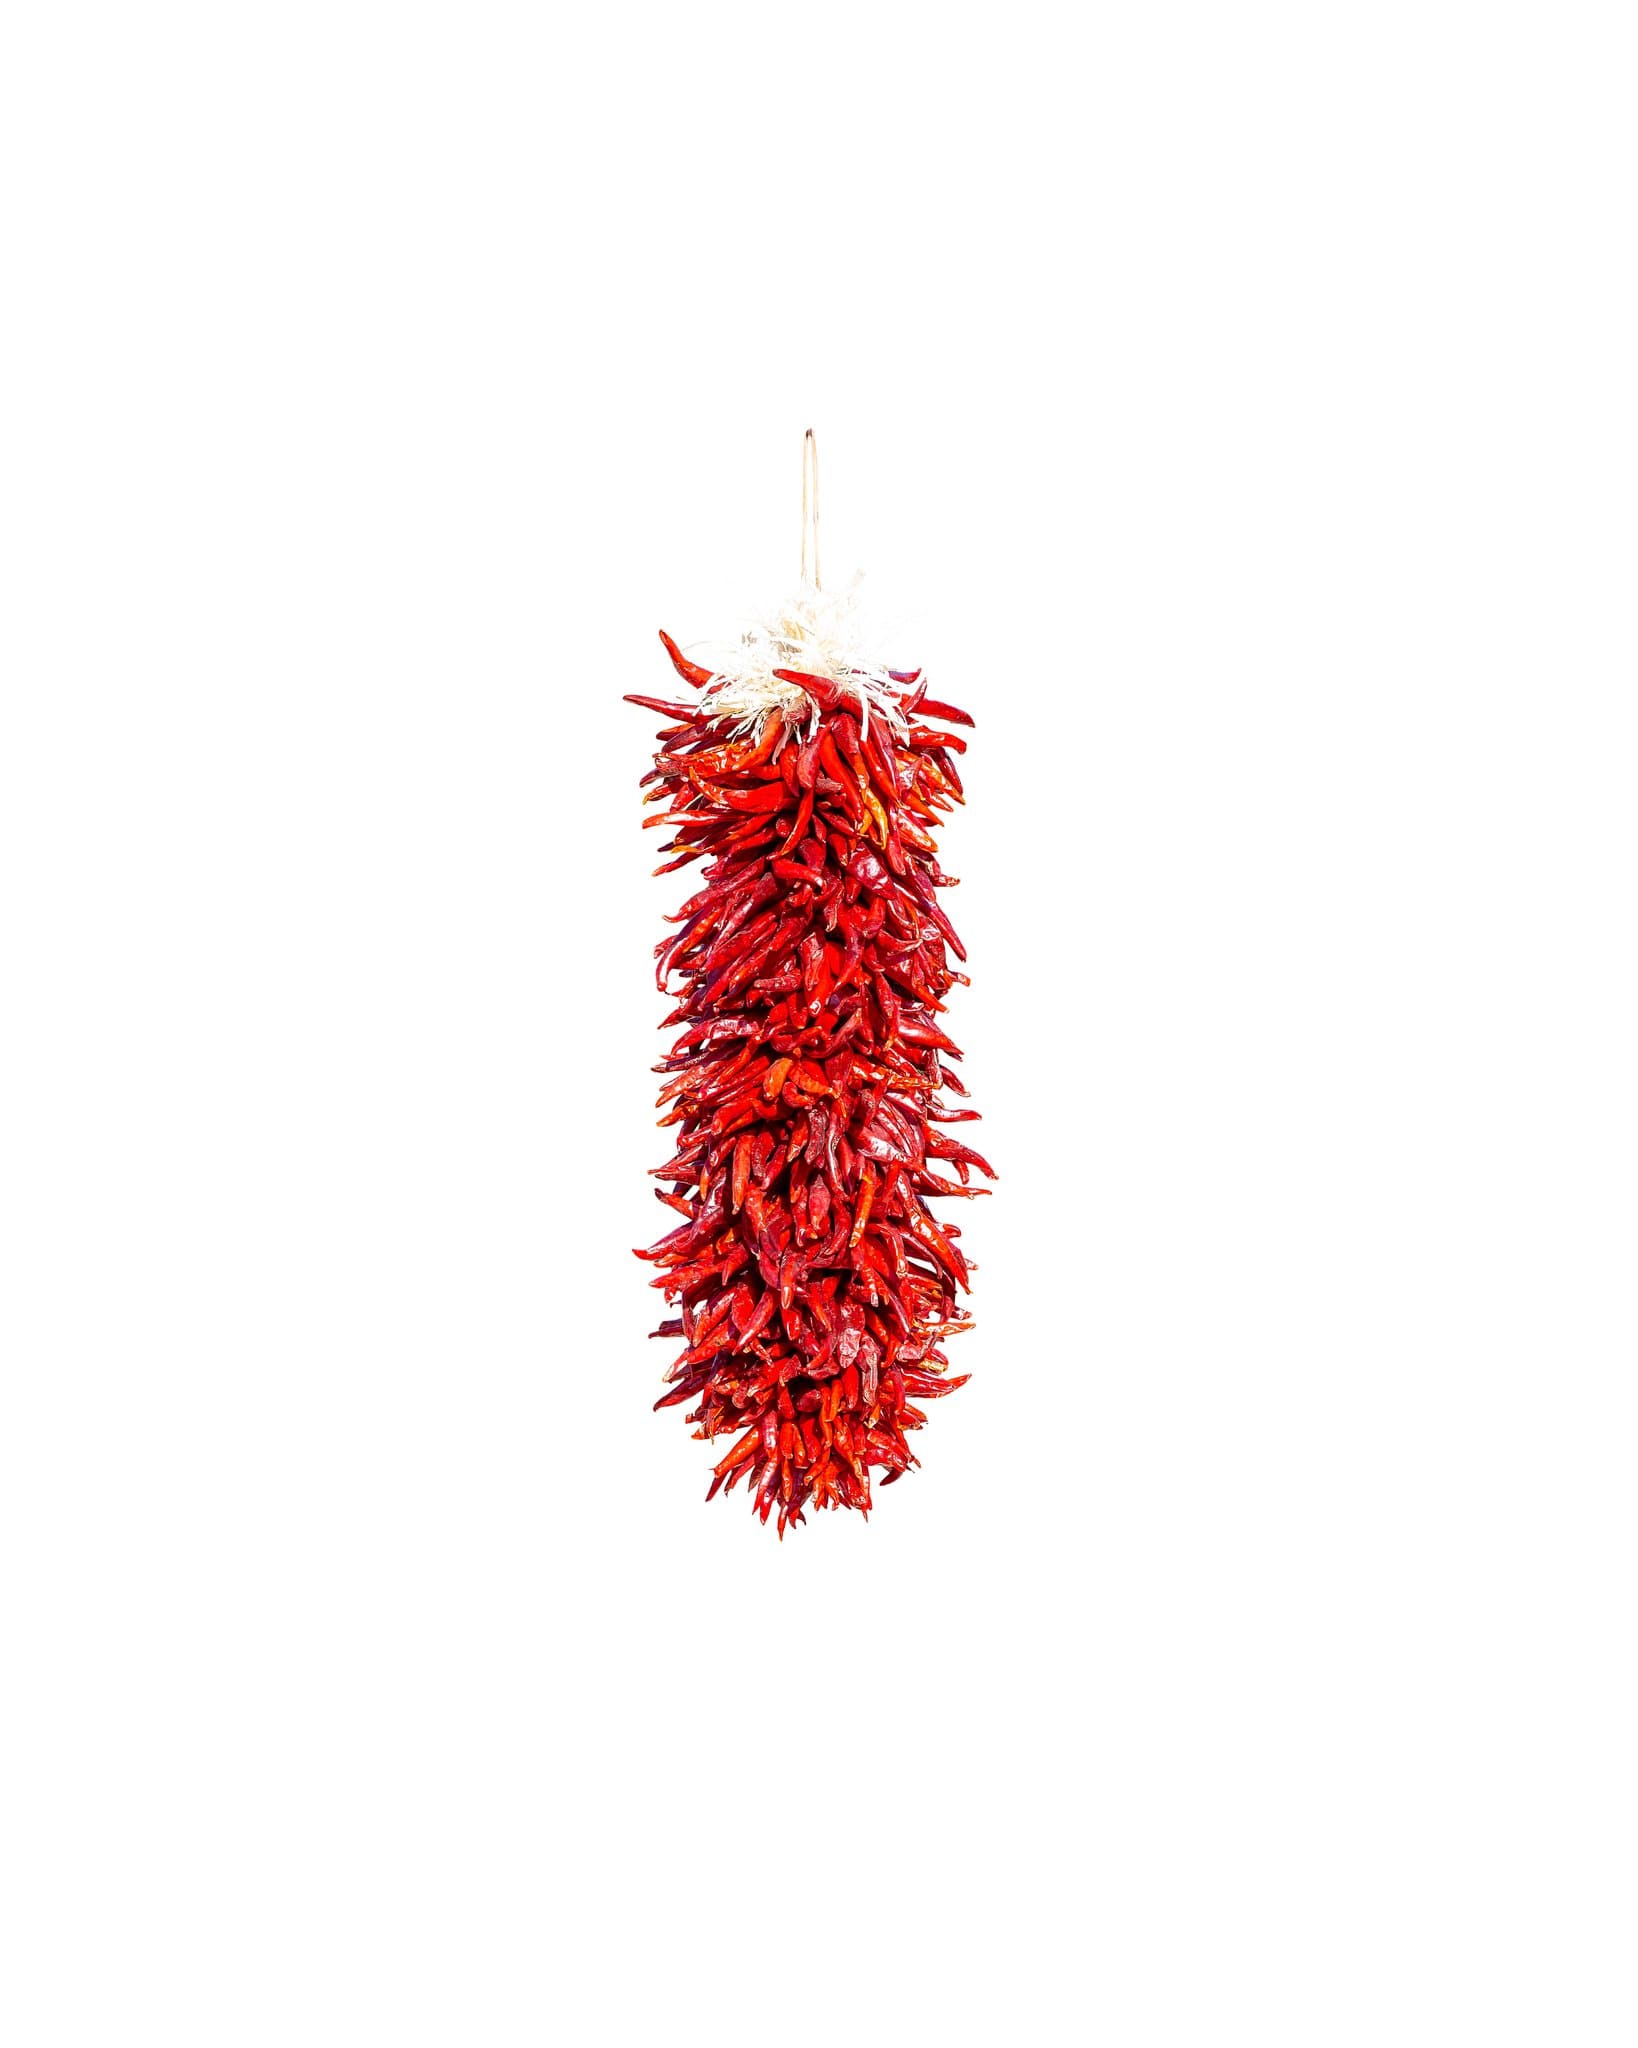 A vertical string of bright red Chile Pequin Ristras, bundled together as a handmade ristra, hanging against a plain white background.